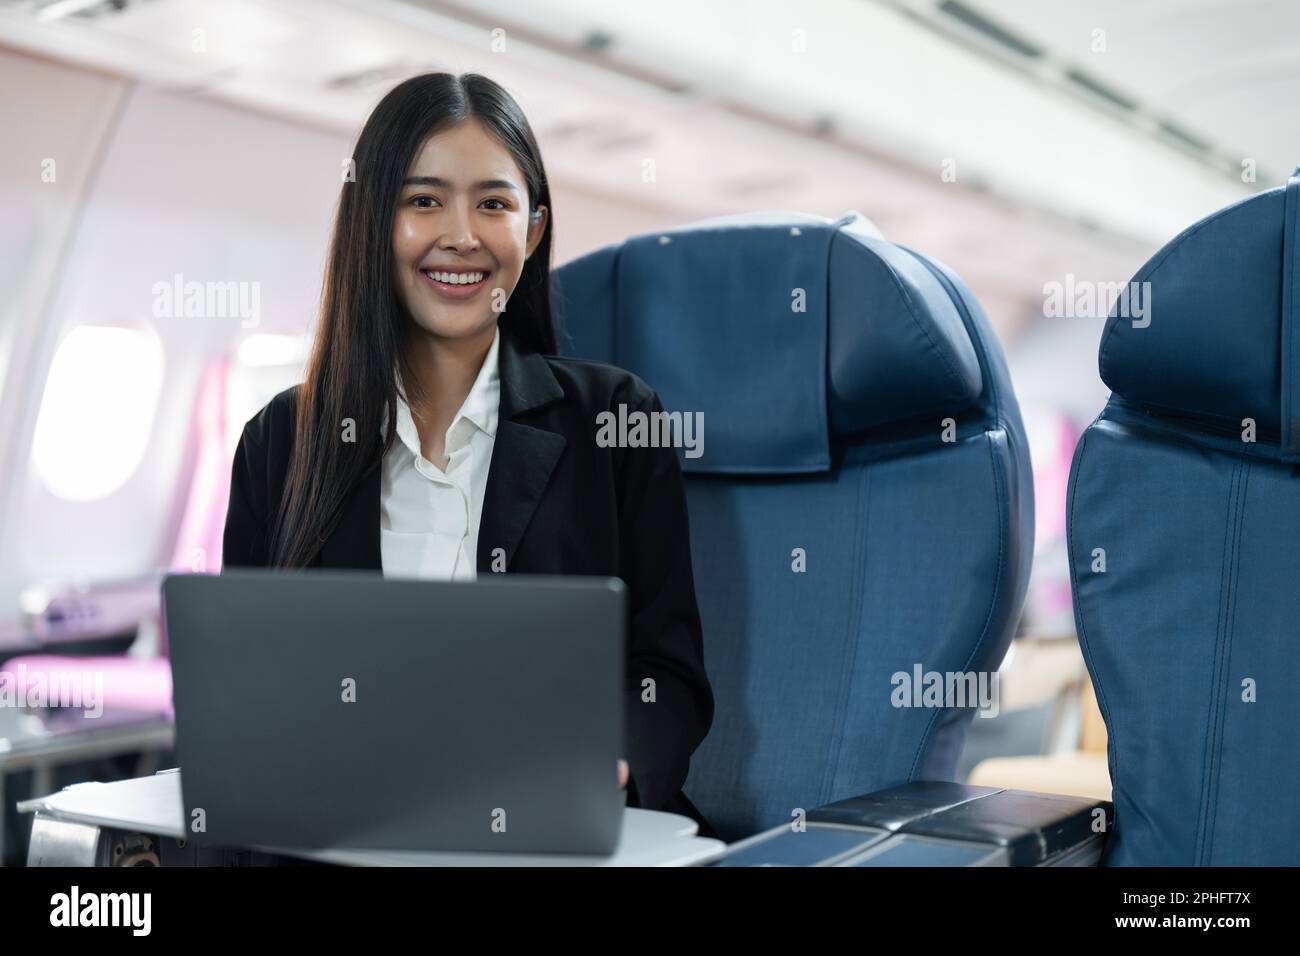 Female passenger sitting on plane while working on laptop computer with simulated space using on board wireless connection Stock Photo